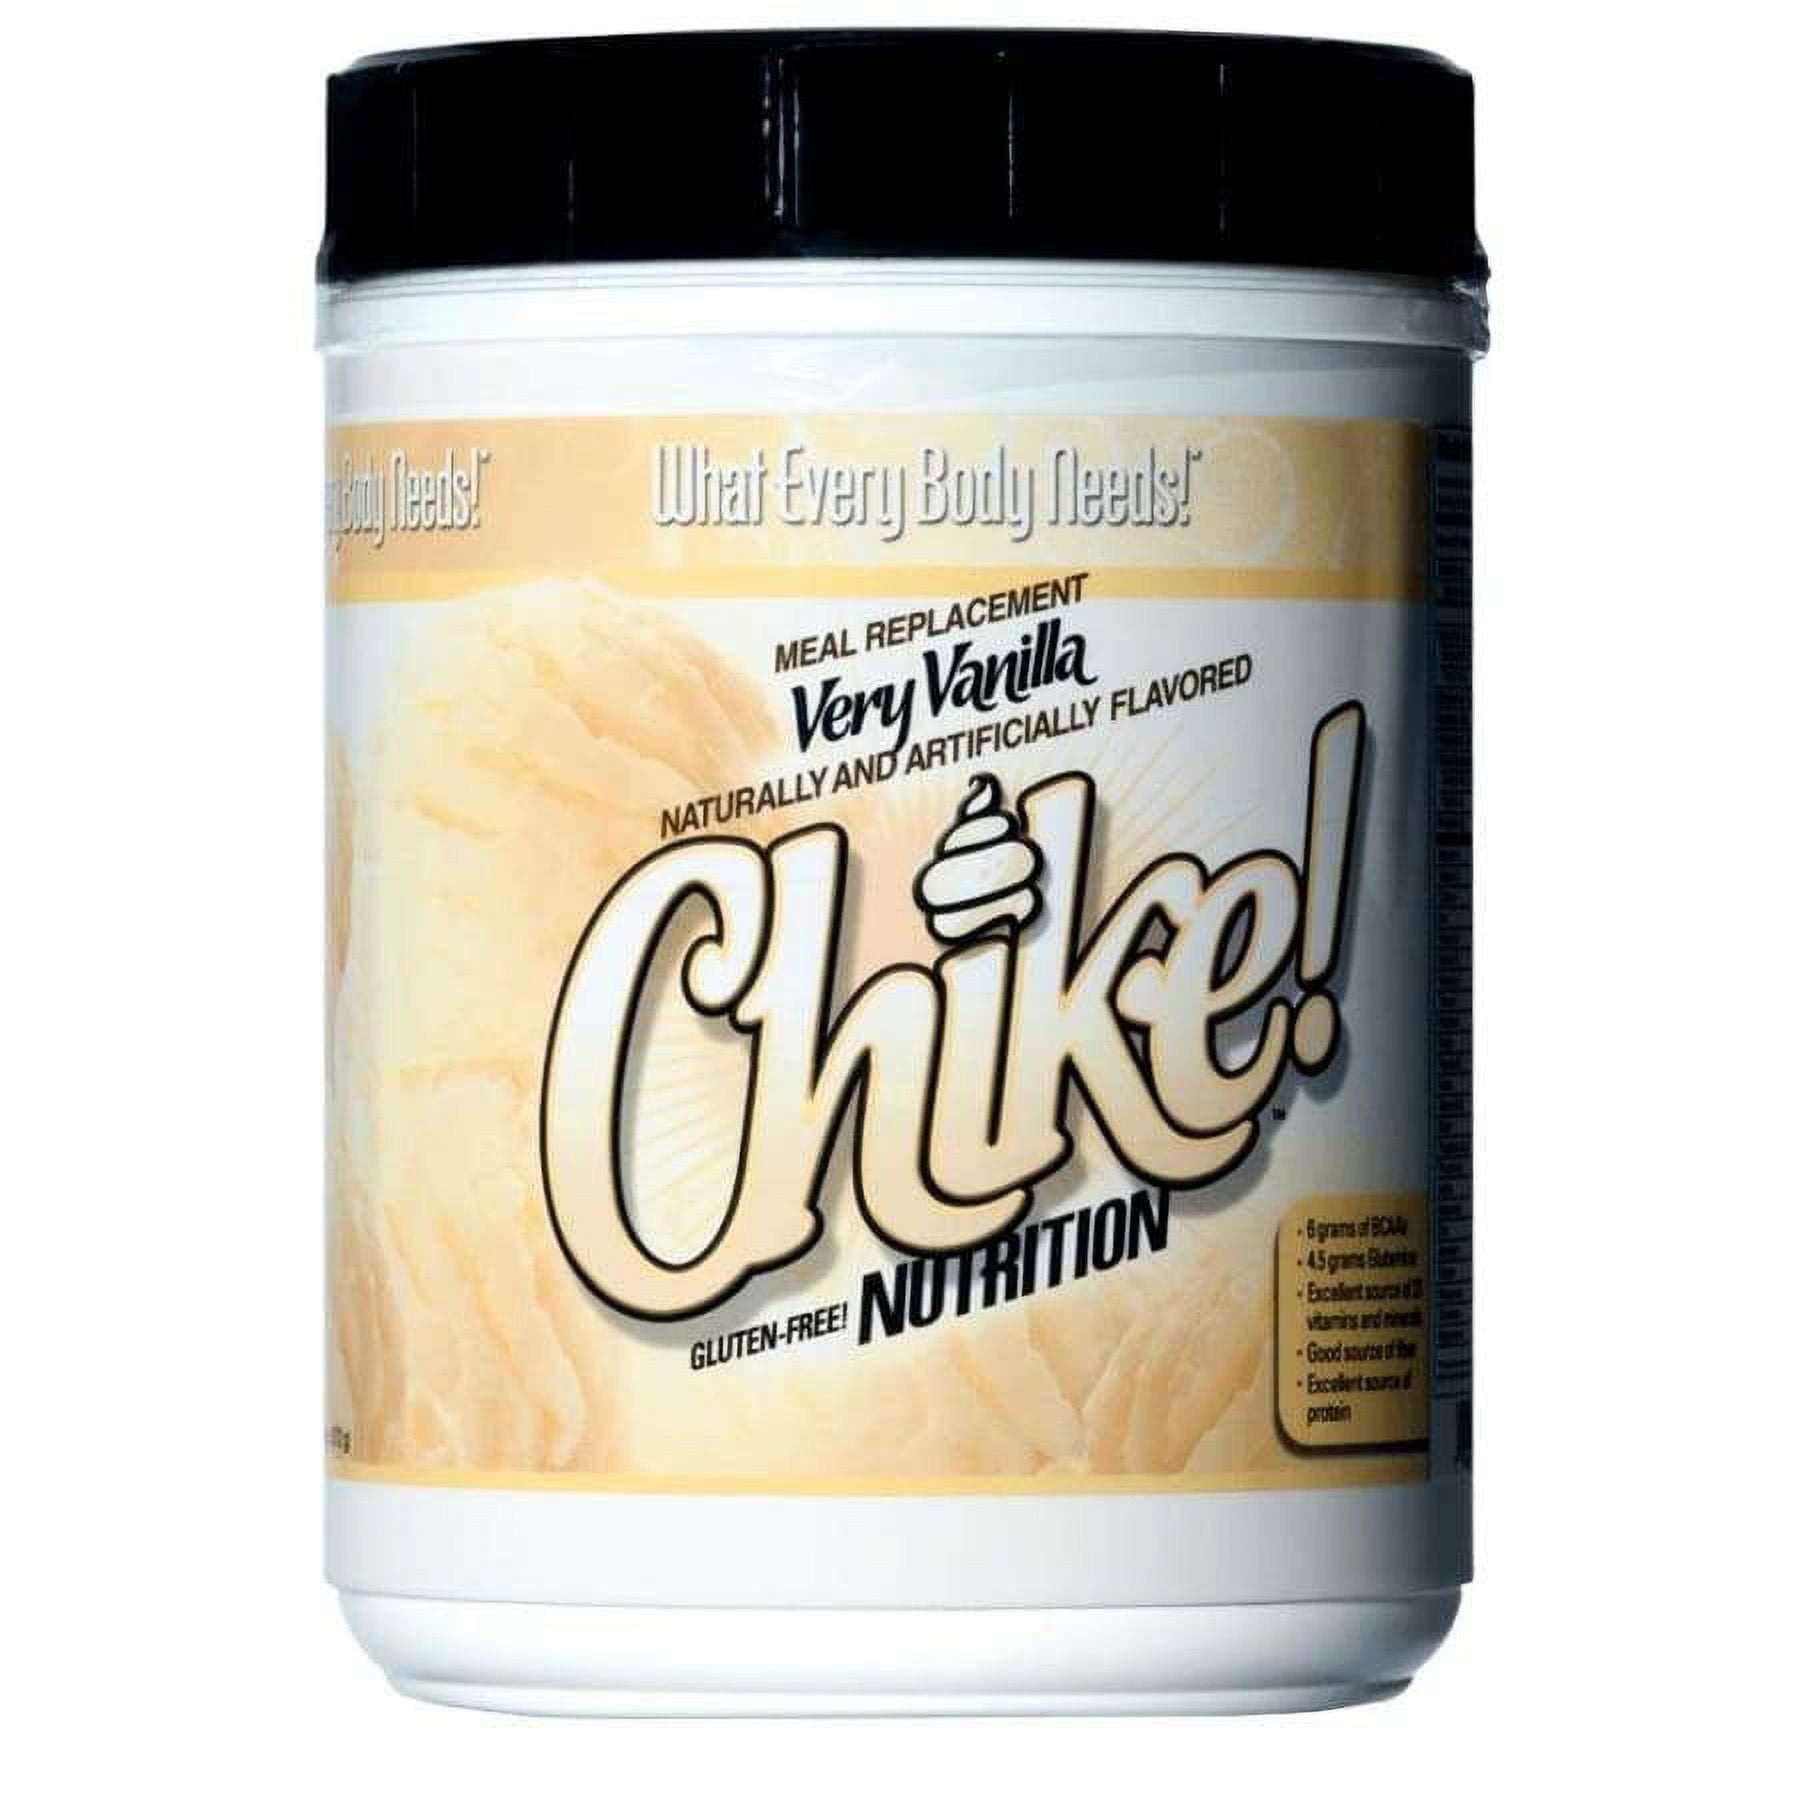 CHIKE Fill-n-Go Protein Powder Funnel - Chike Nutrition